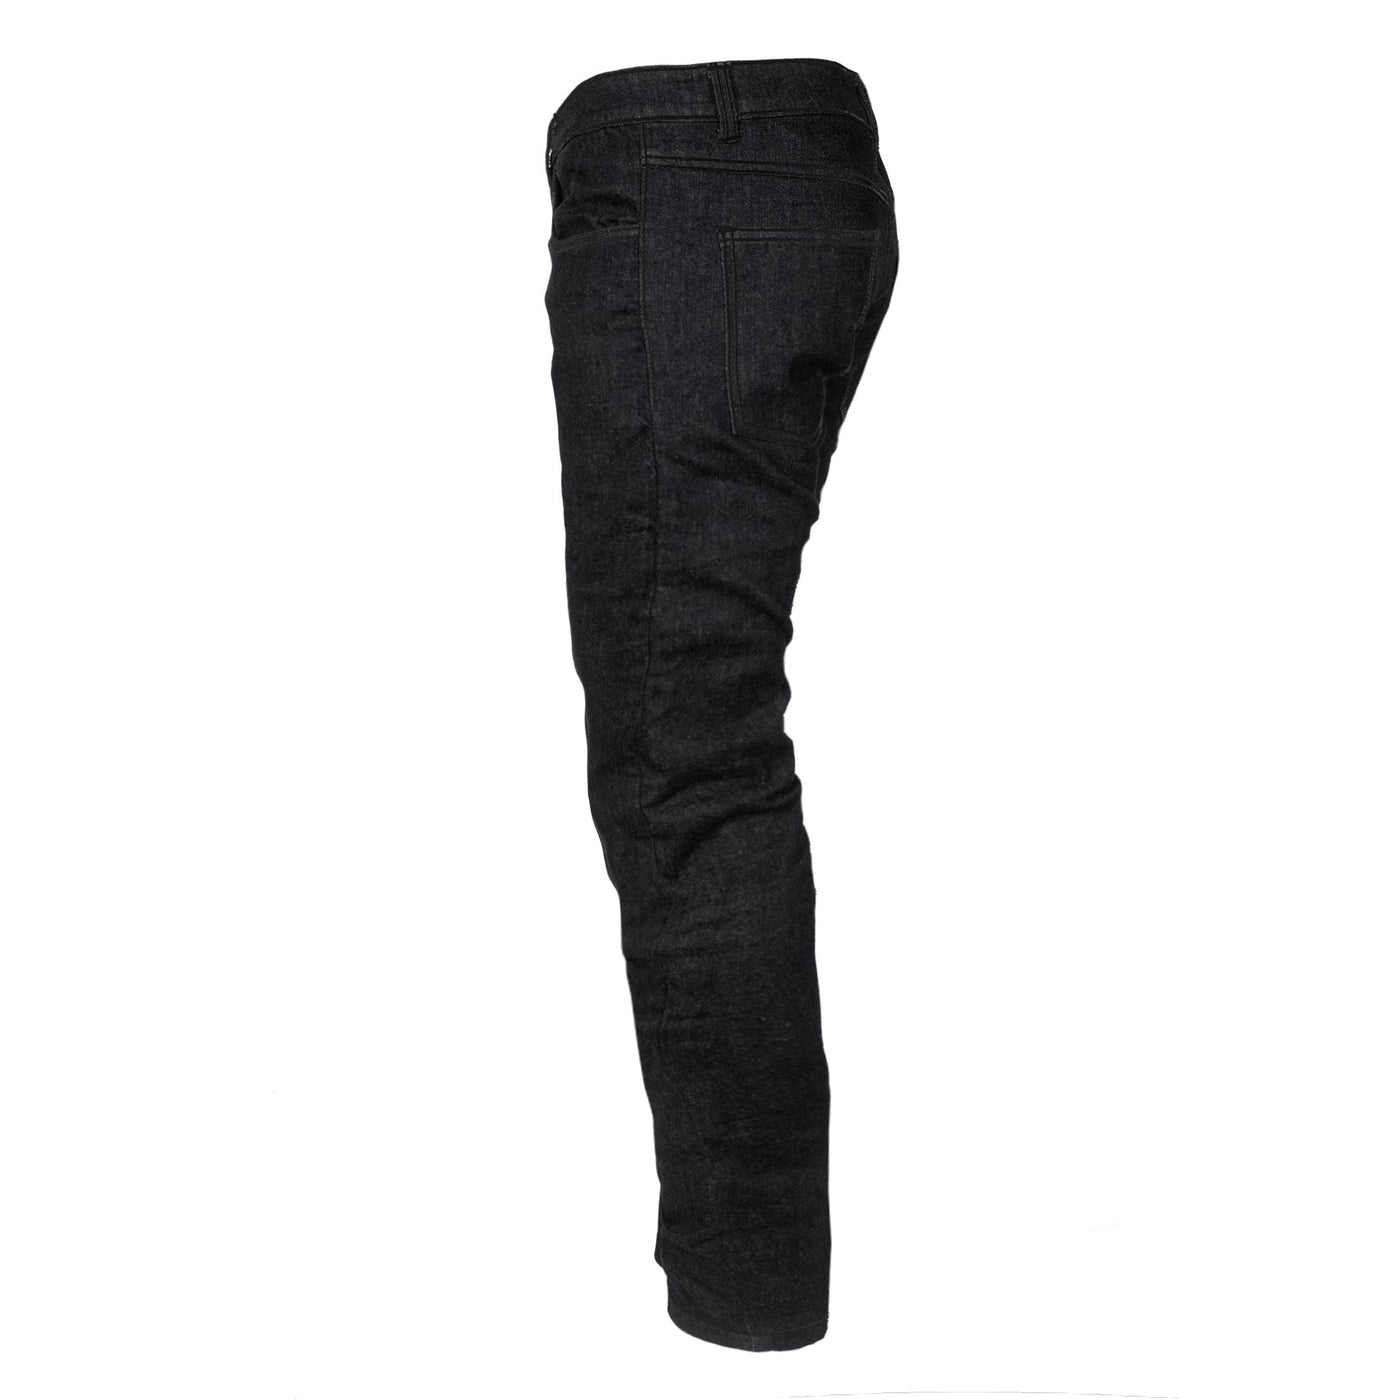 Relaxed Fit Protective Jeans with Pads - Black